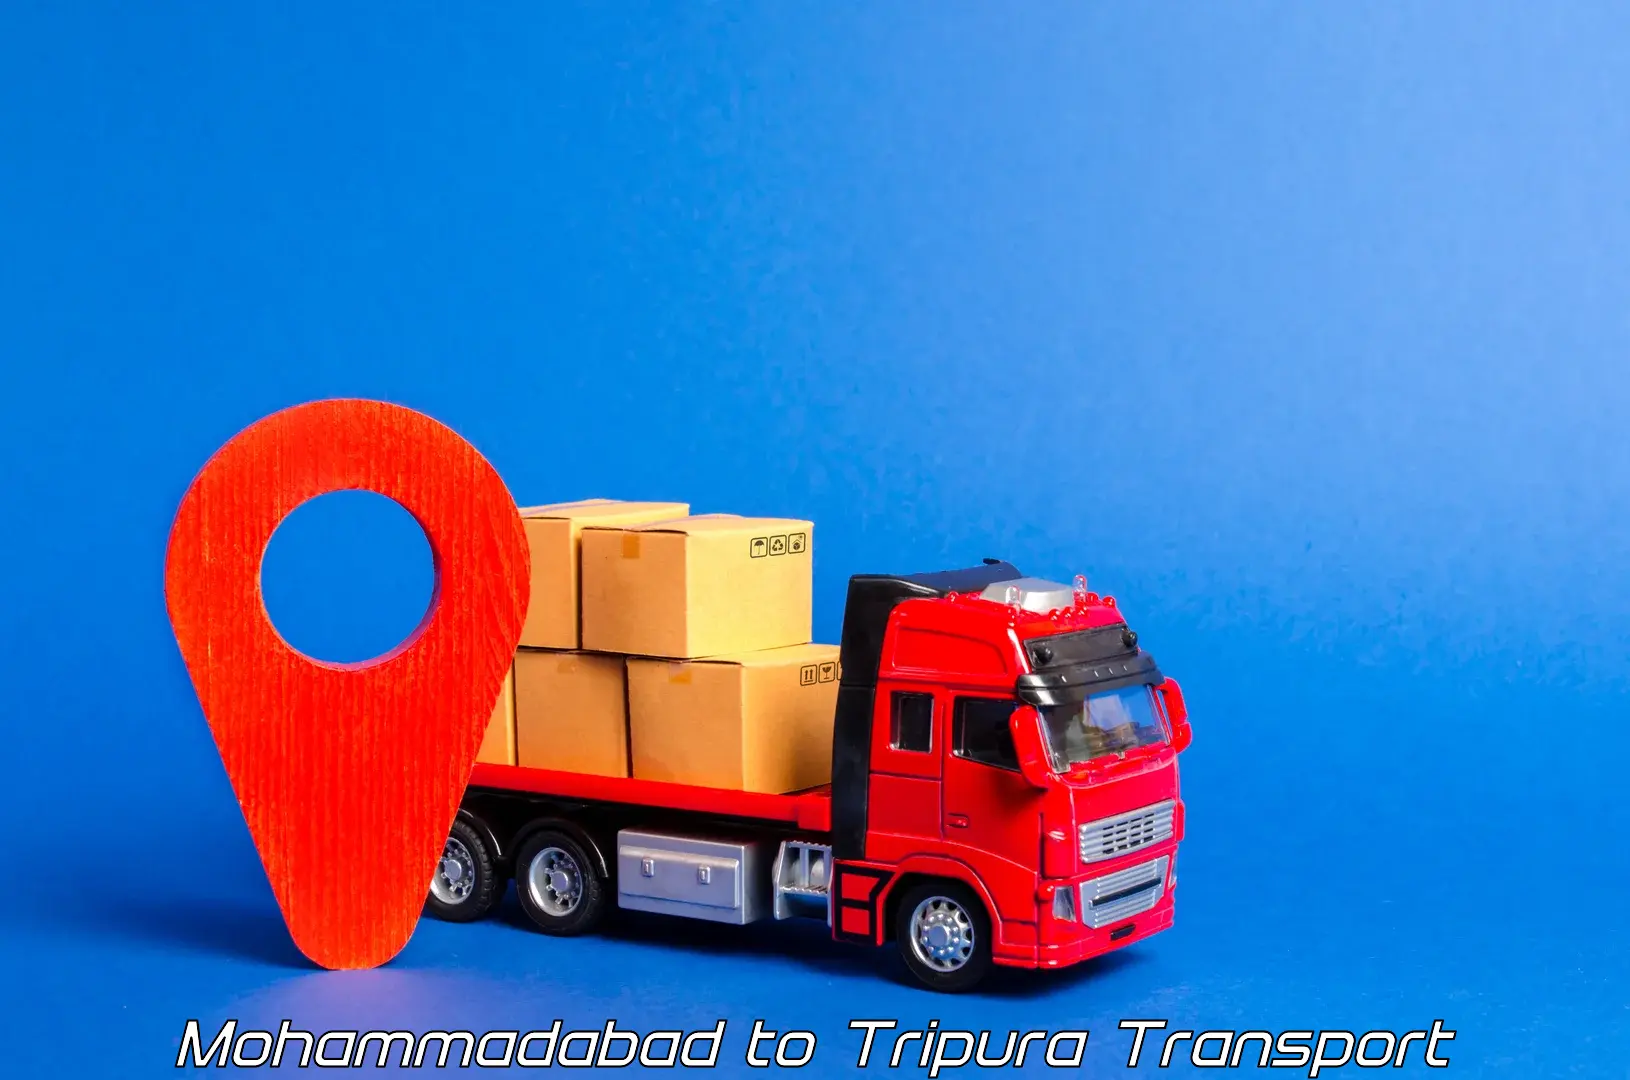 Daily parcel service transport in Mohammadabad to Tripura